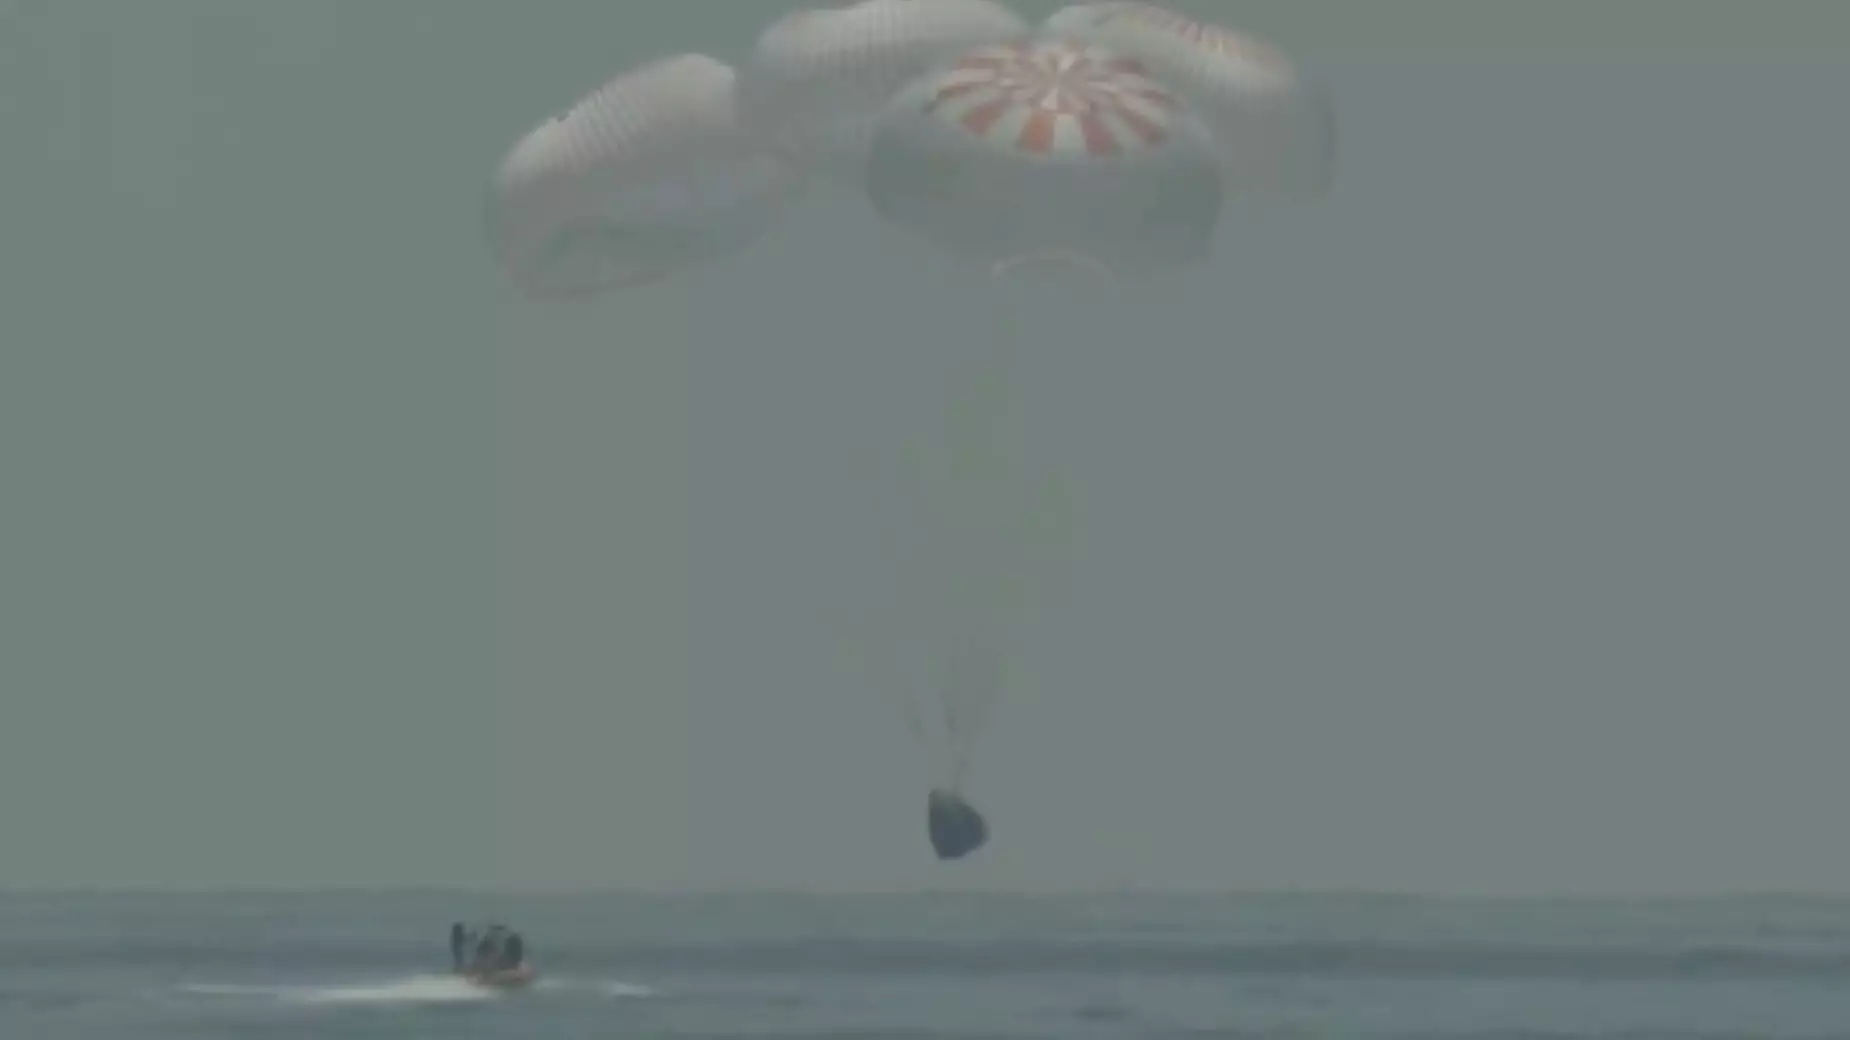 Two NASA Astronauts Successfully Brought Back To Earth On SpaceX's New Crew Dragon Spaceship